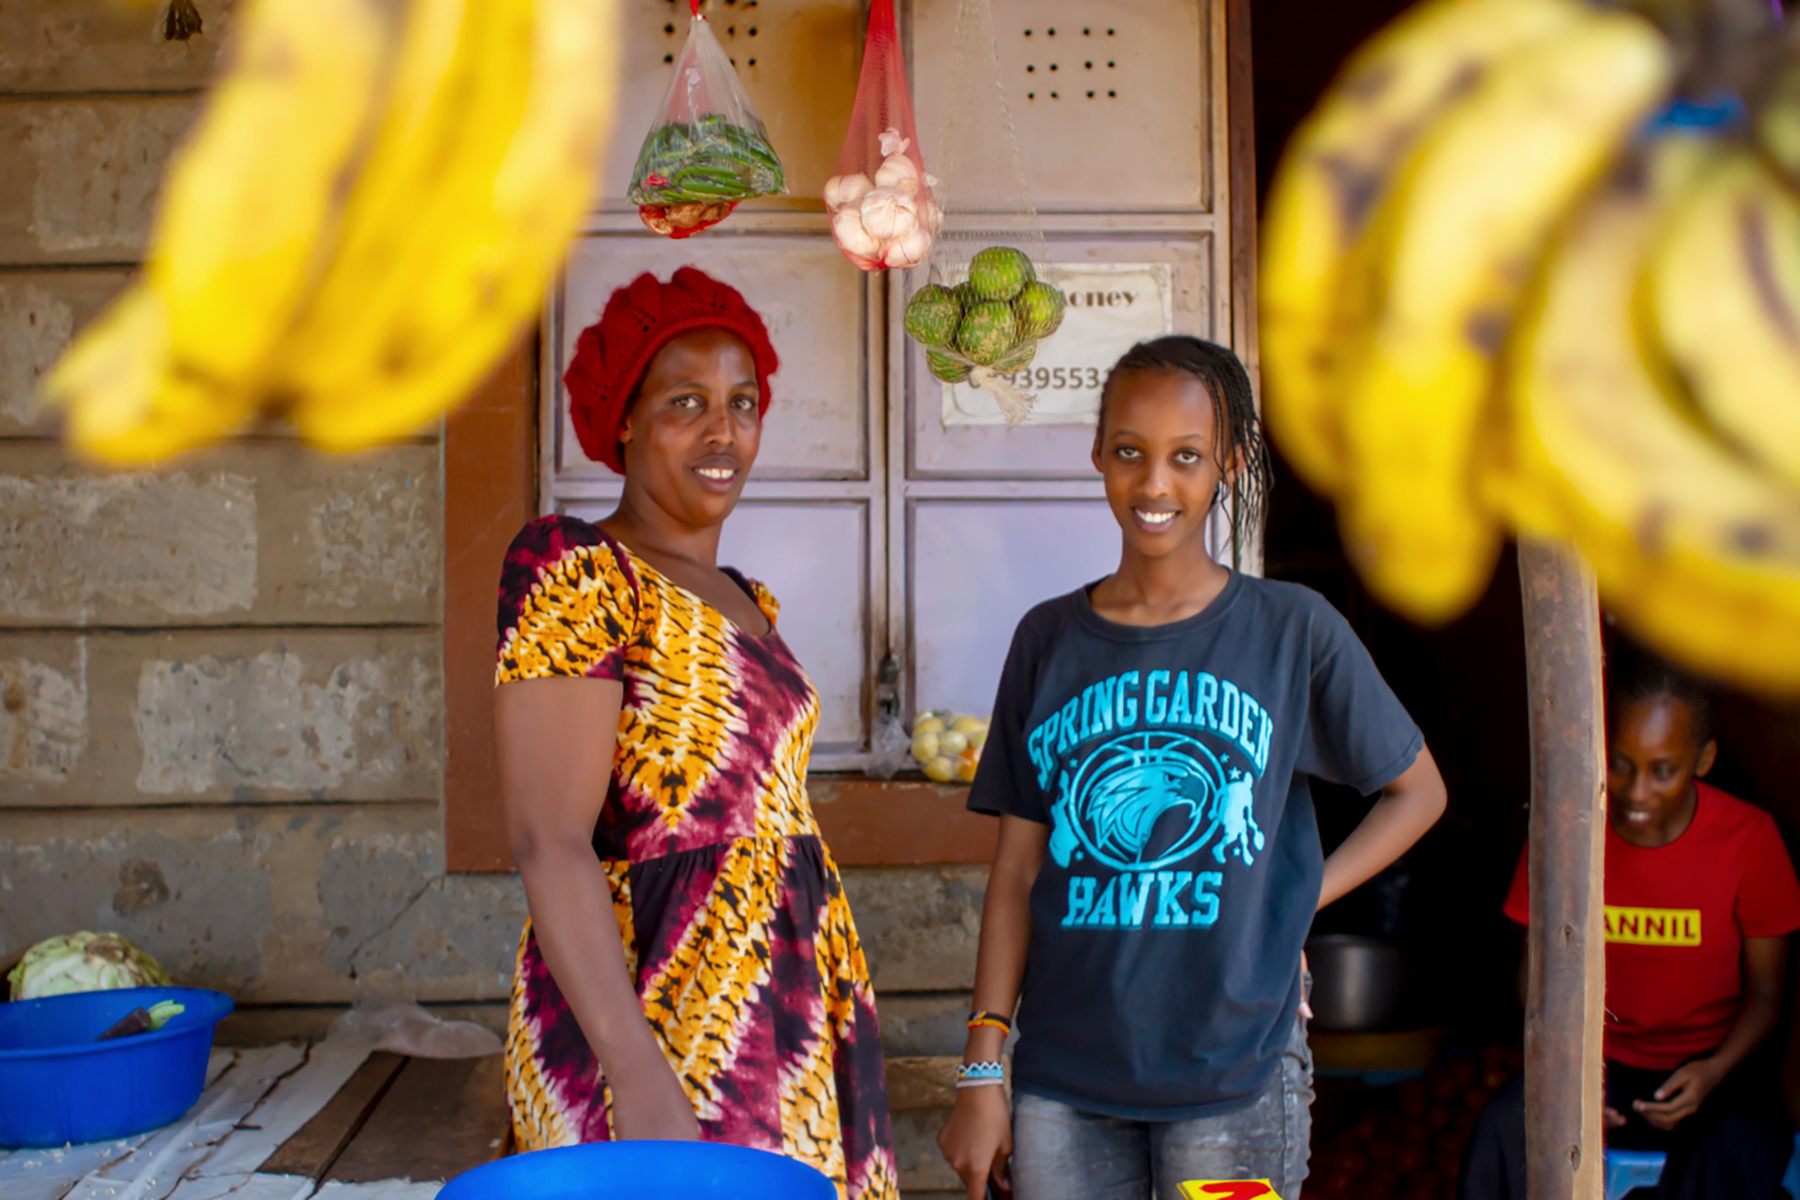 After school, Nakazungu’s 14-year-old daughter, Denise, helps her mother at her shop, the earnings from which help pay her school fees. Denise, who boasts the top marks in her class, showed off her language skills, speaking in Swahili, Kinyamulenge, English, and French.